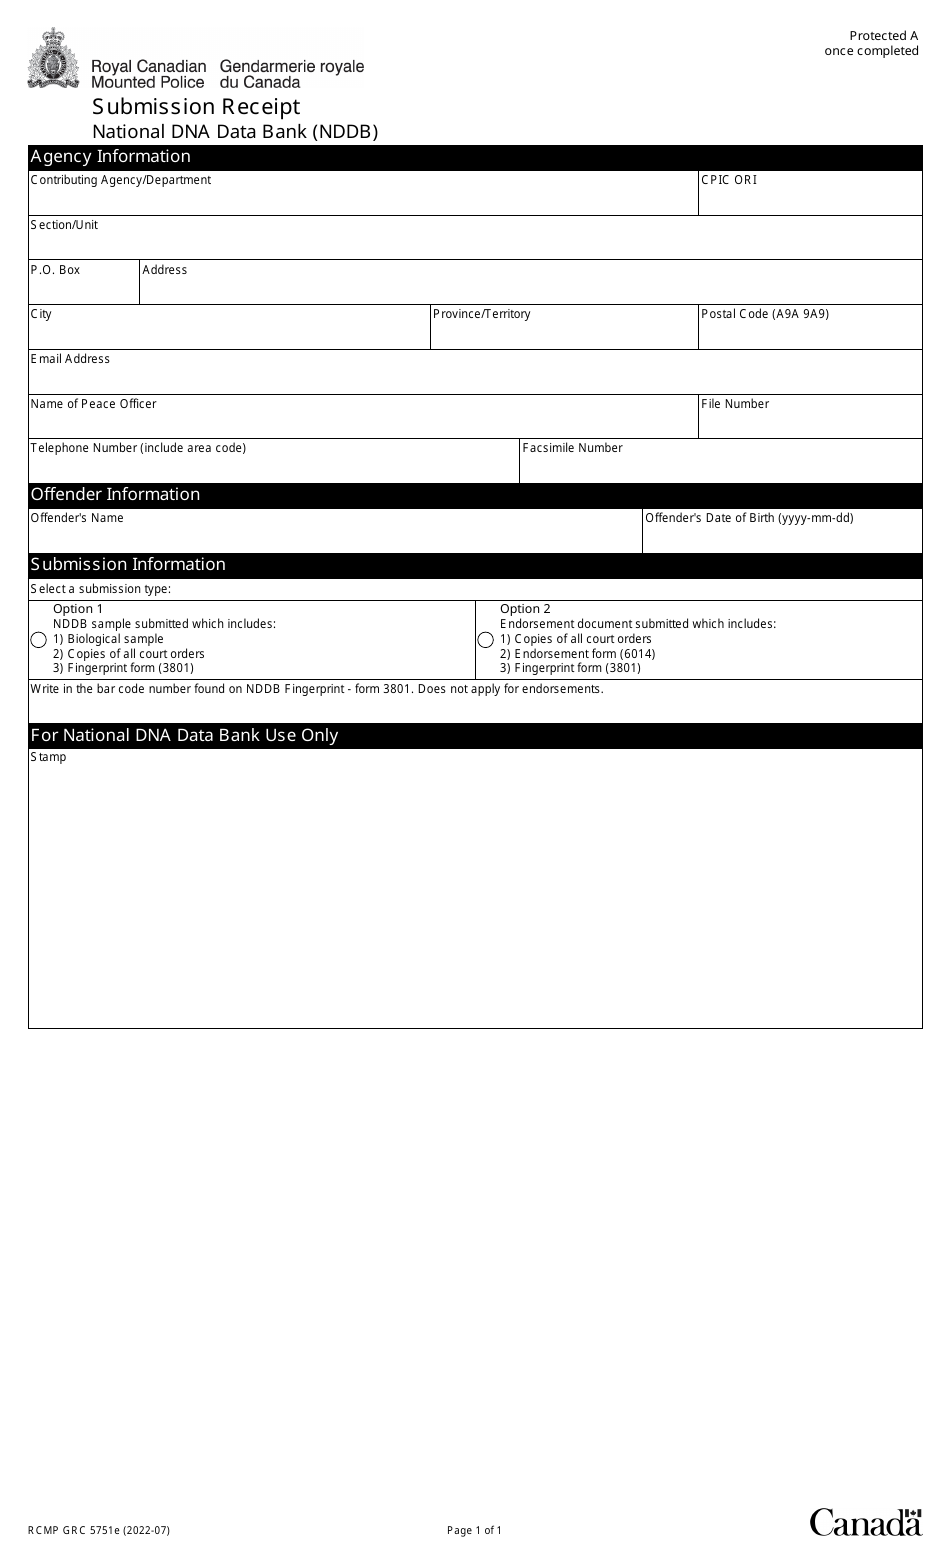 Form RCMP GRC5751E Submission Receipt - National Dna Data Bank (Nddb) - Canada, Page 1